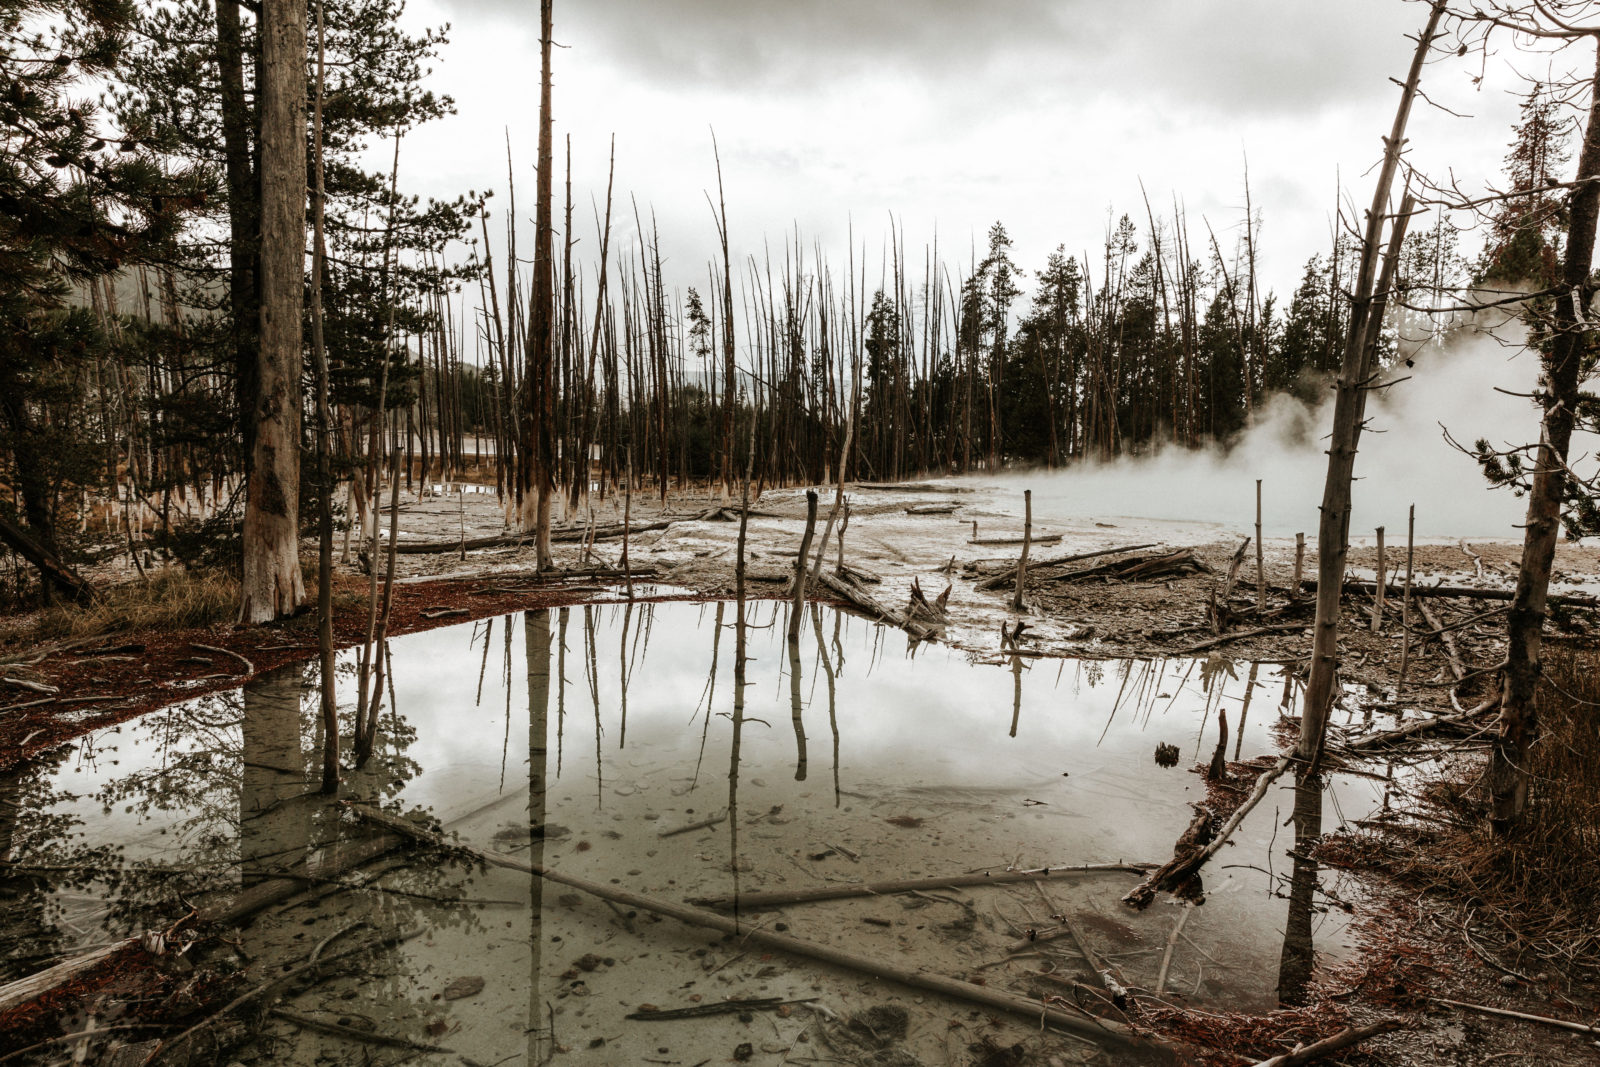 Ominous and spooky trees found in Norris Geyser Basin